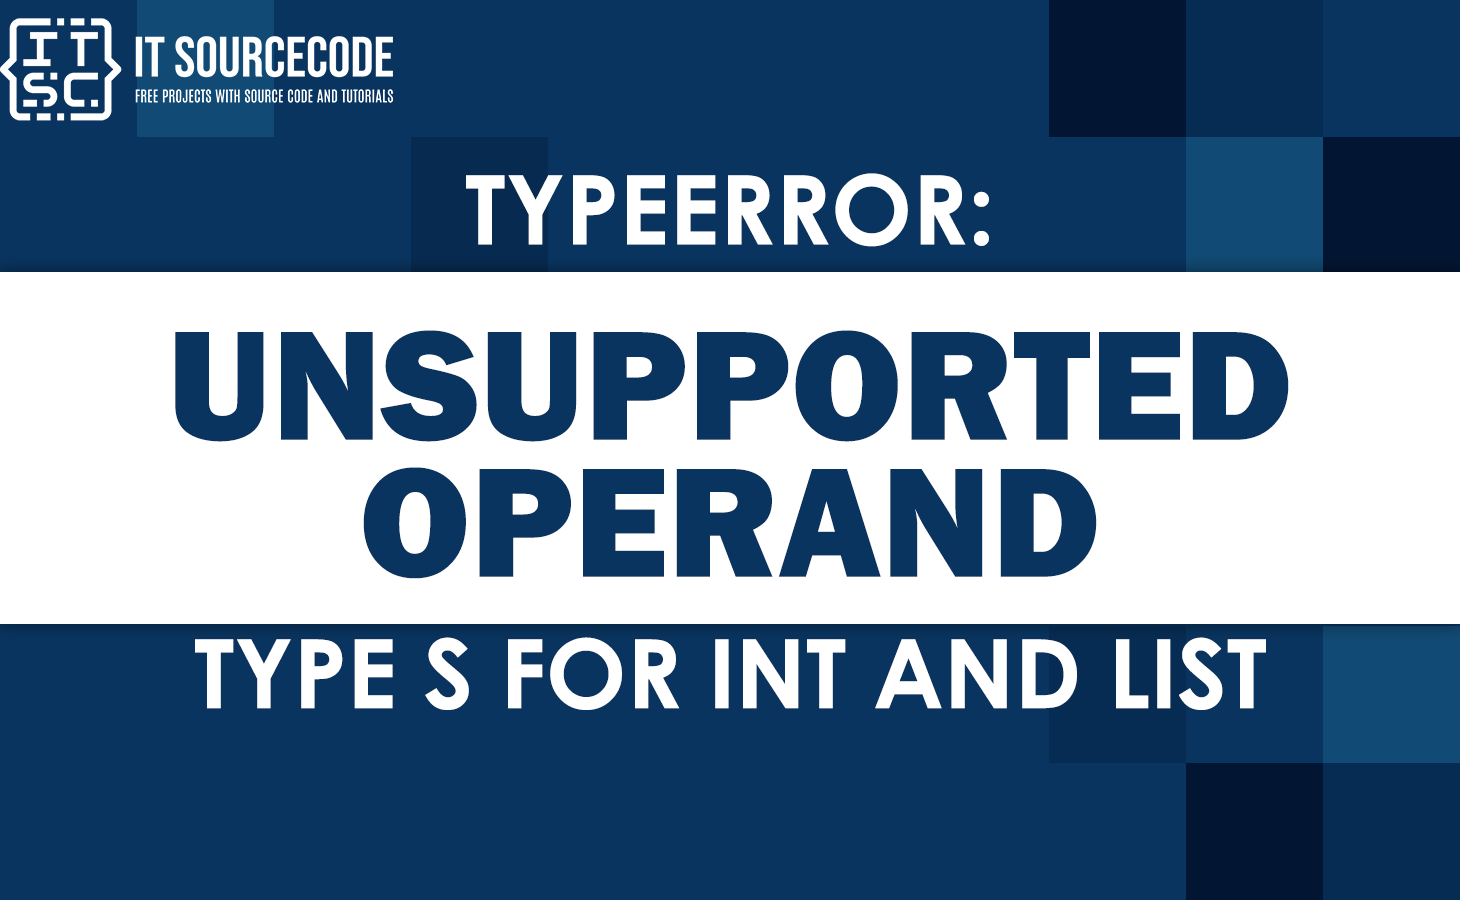 Typeerror unsupported operand type s for int and list